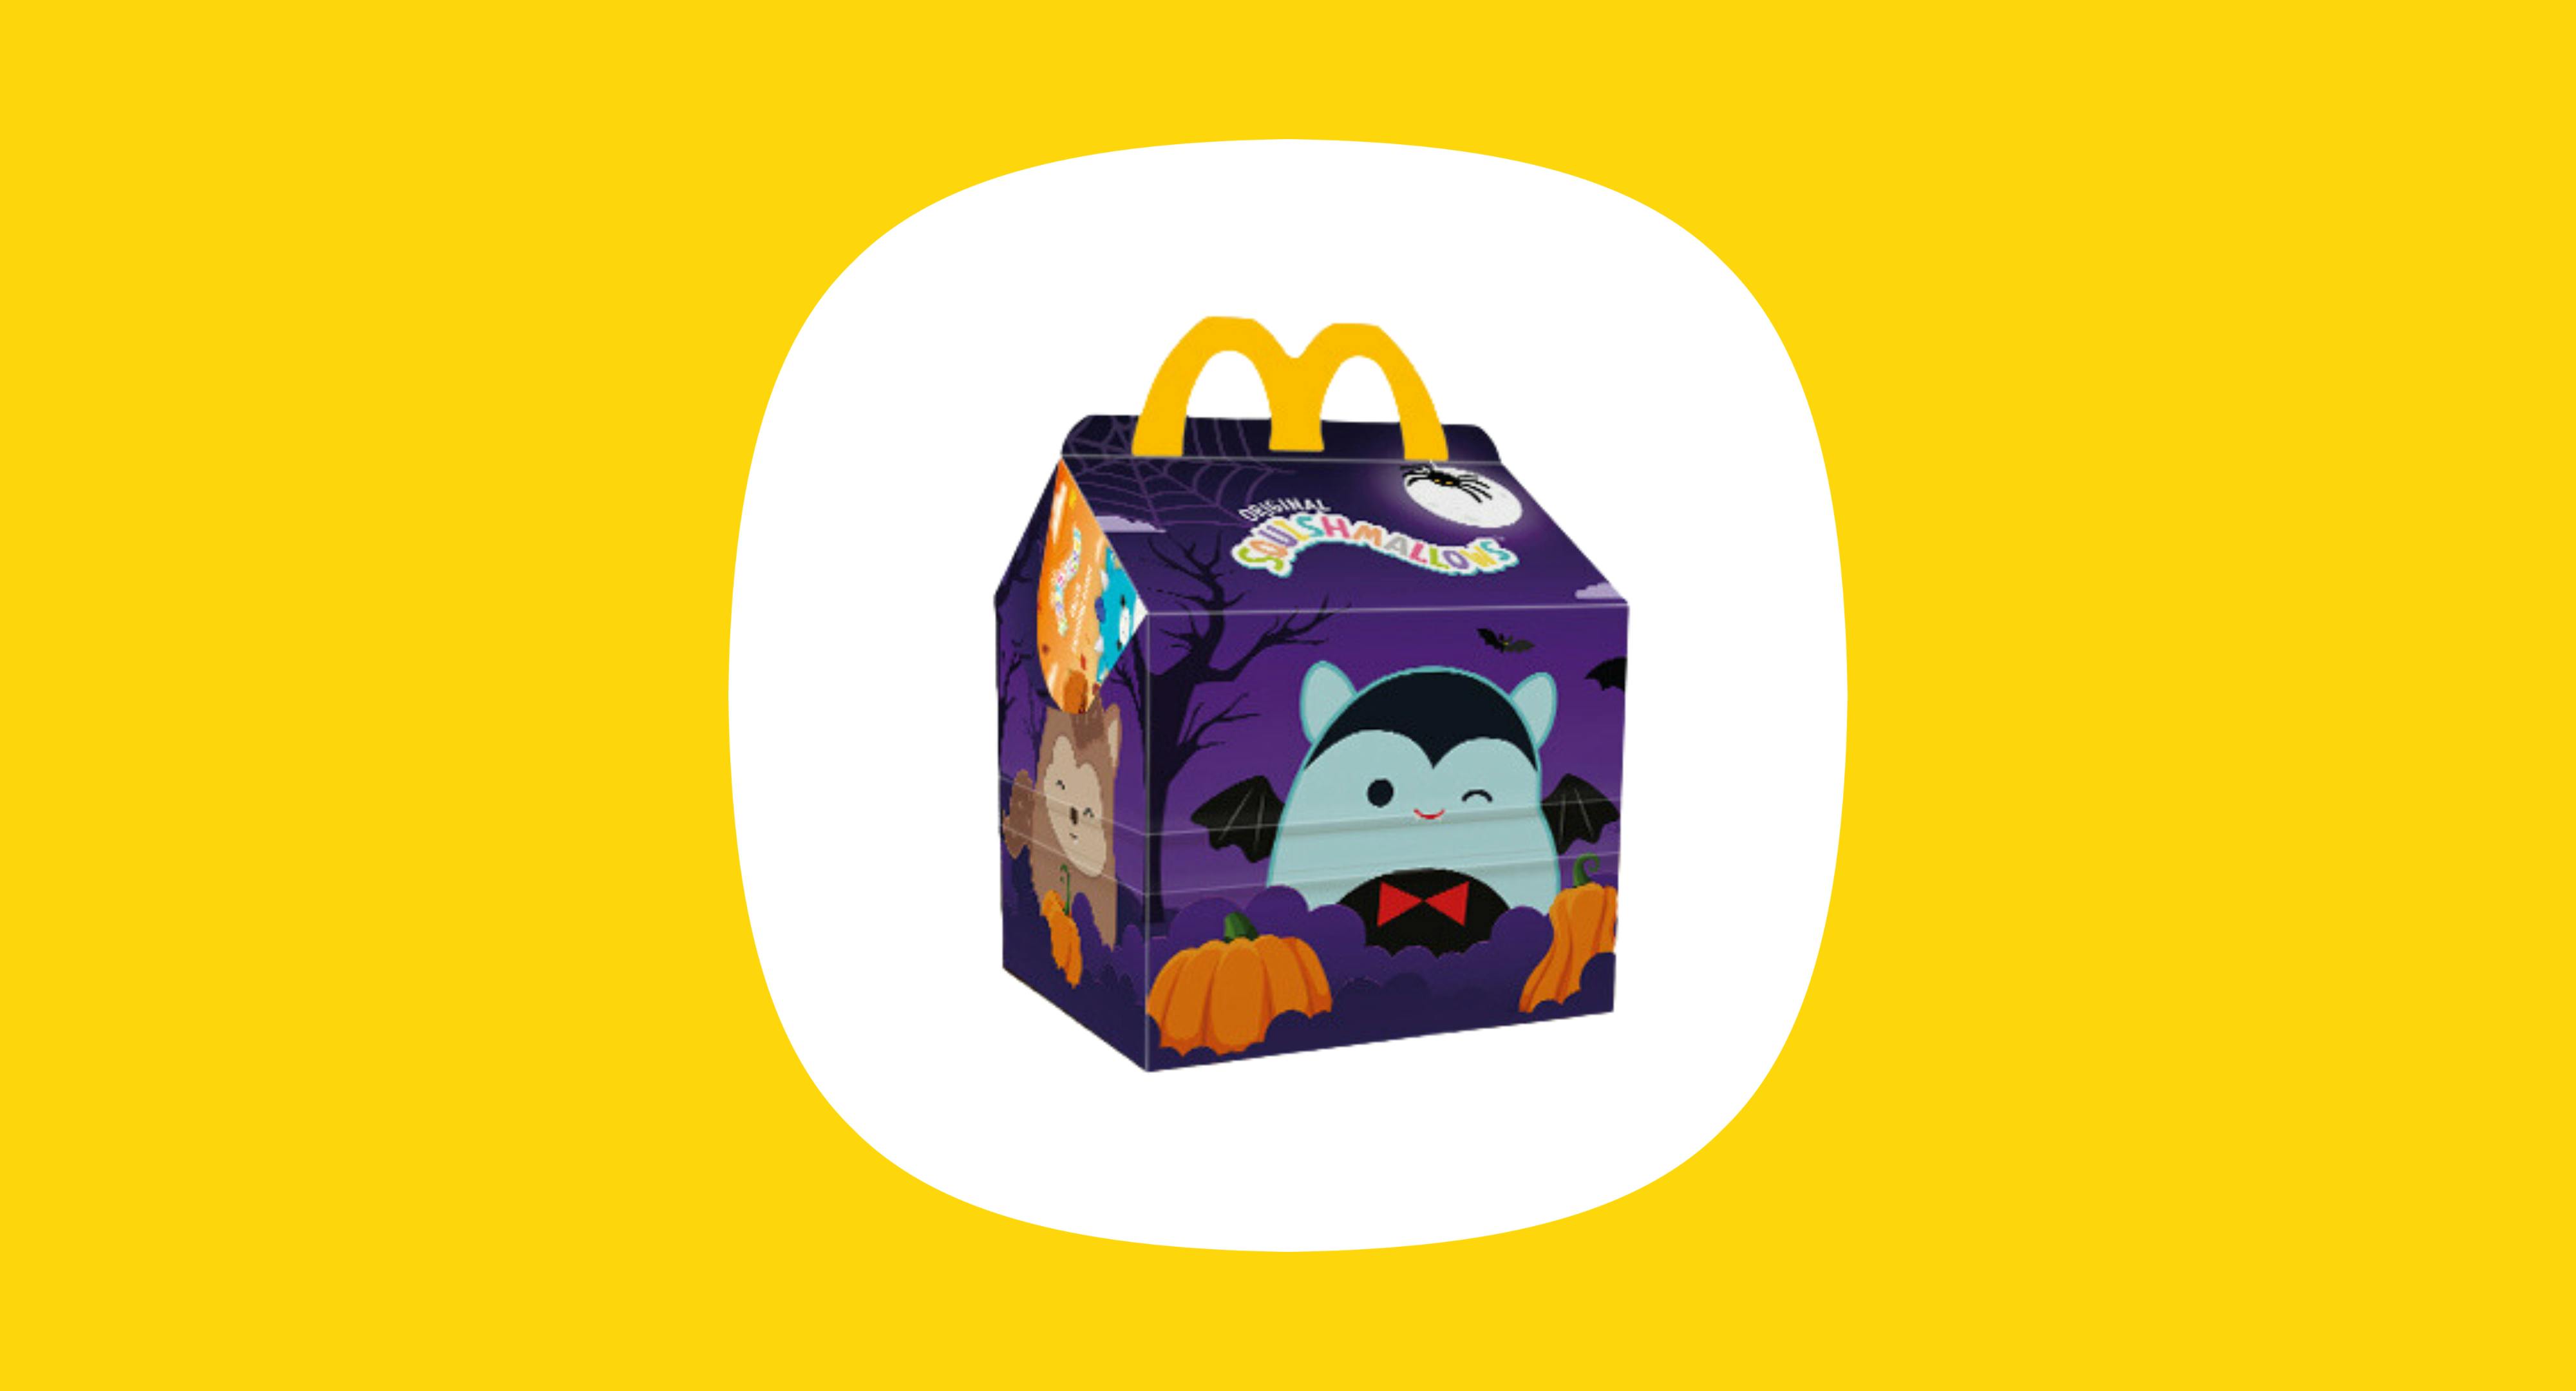 A McDonald's Happy Meal Purse?! And That's Just One Thing in This Must-Buy  Collection 